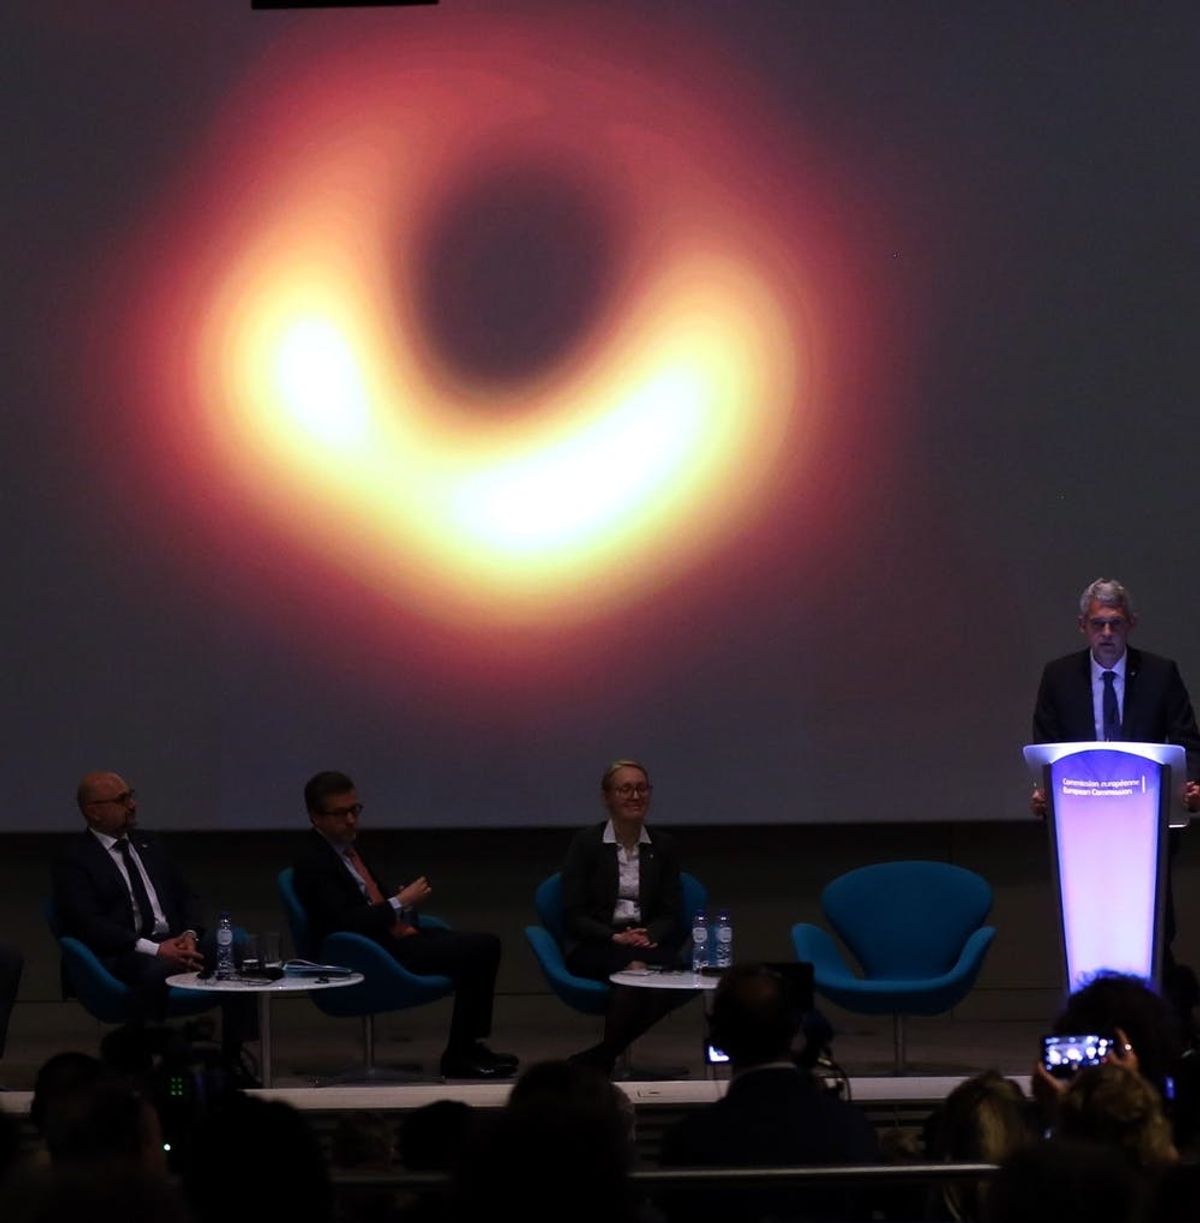 The Black Hole Photo Everyone’s Freaking Out About Was Made Possible by This Female Grad Student